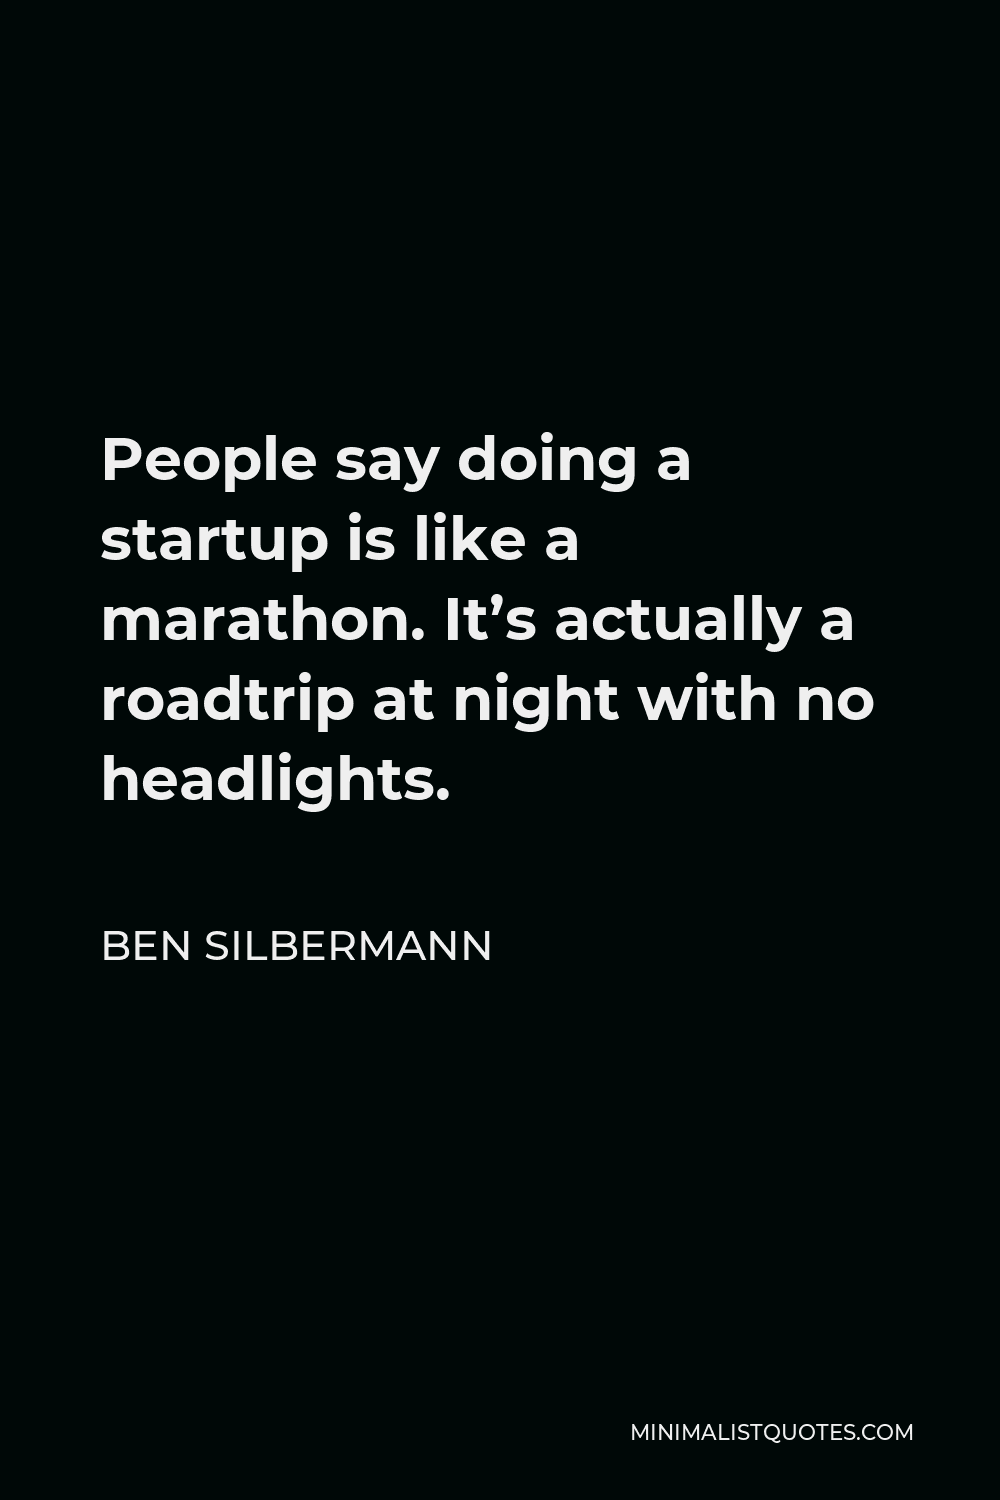 Ben Silbermann Quote - People say doing a startup is like a marathon. It’s actually a roadtrip at night with no headlights.